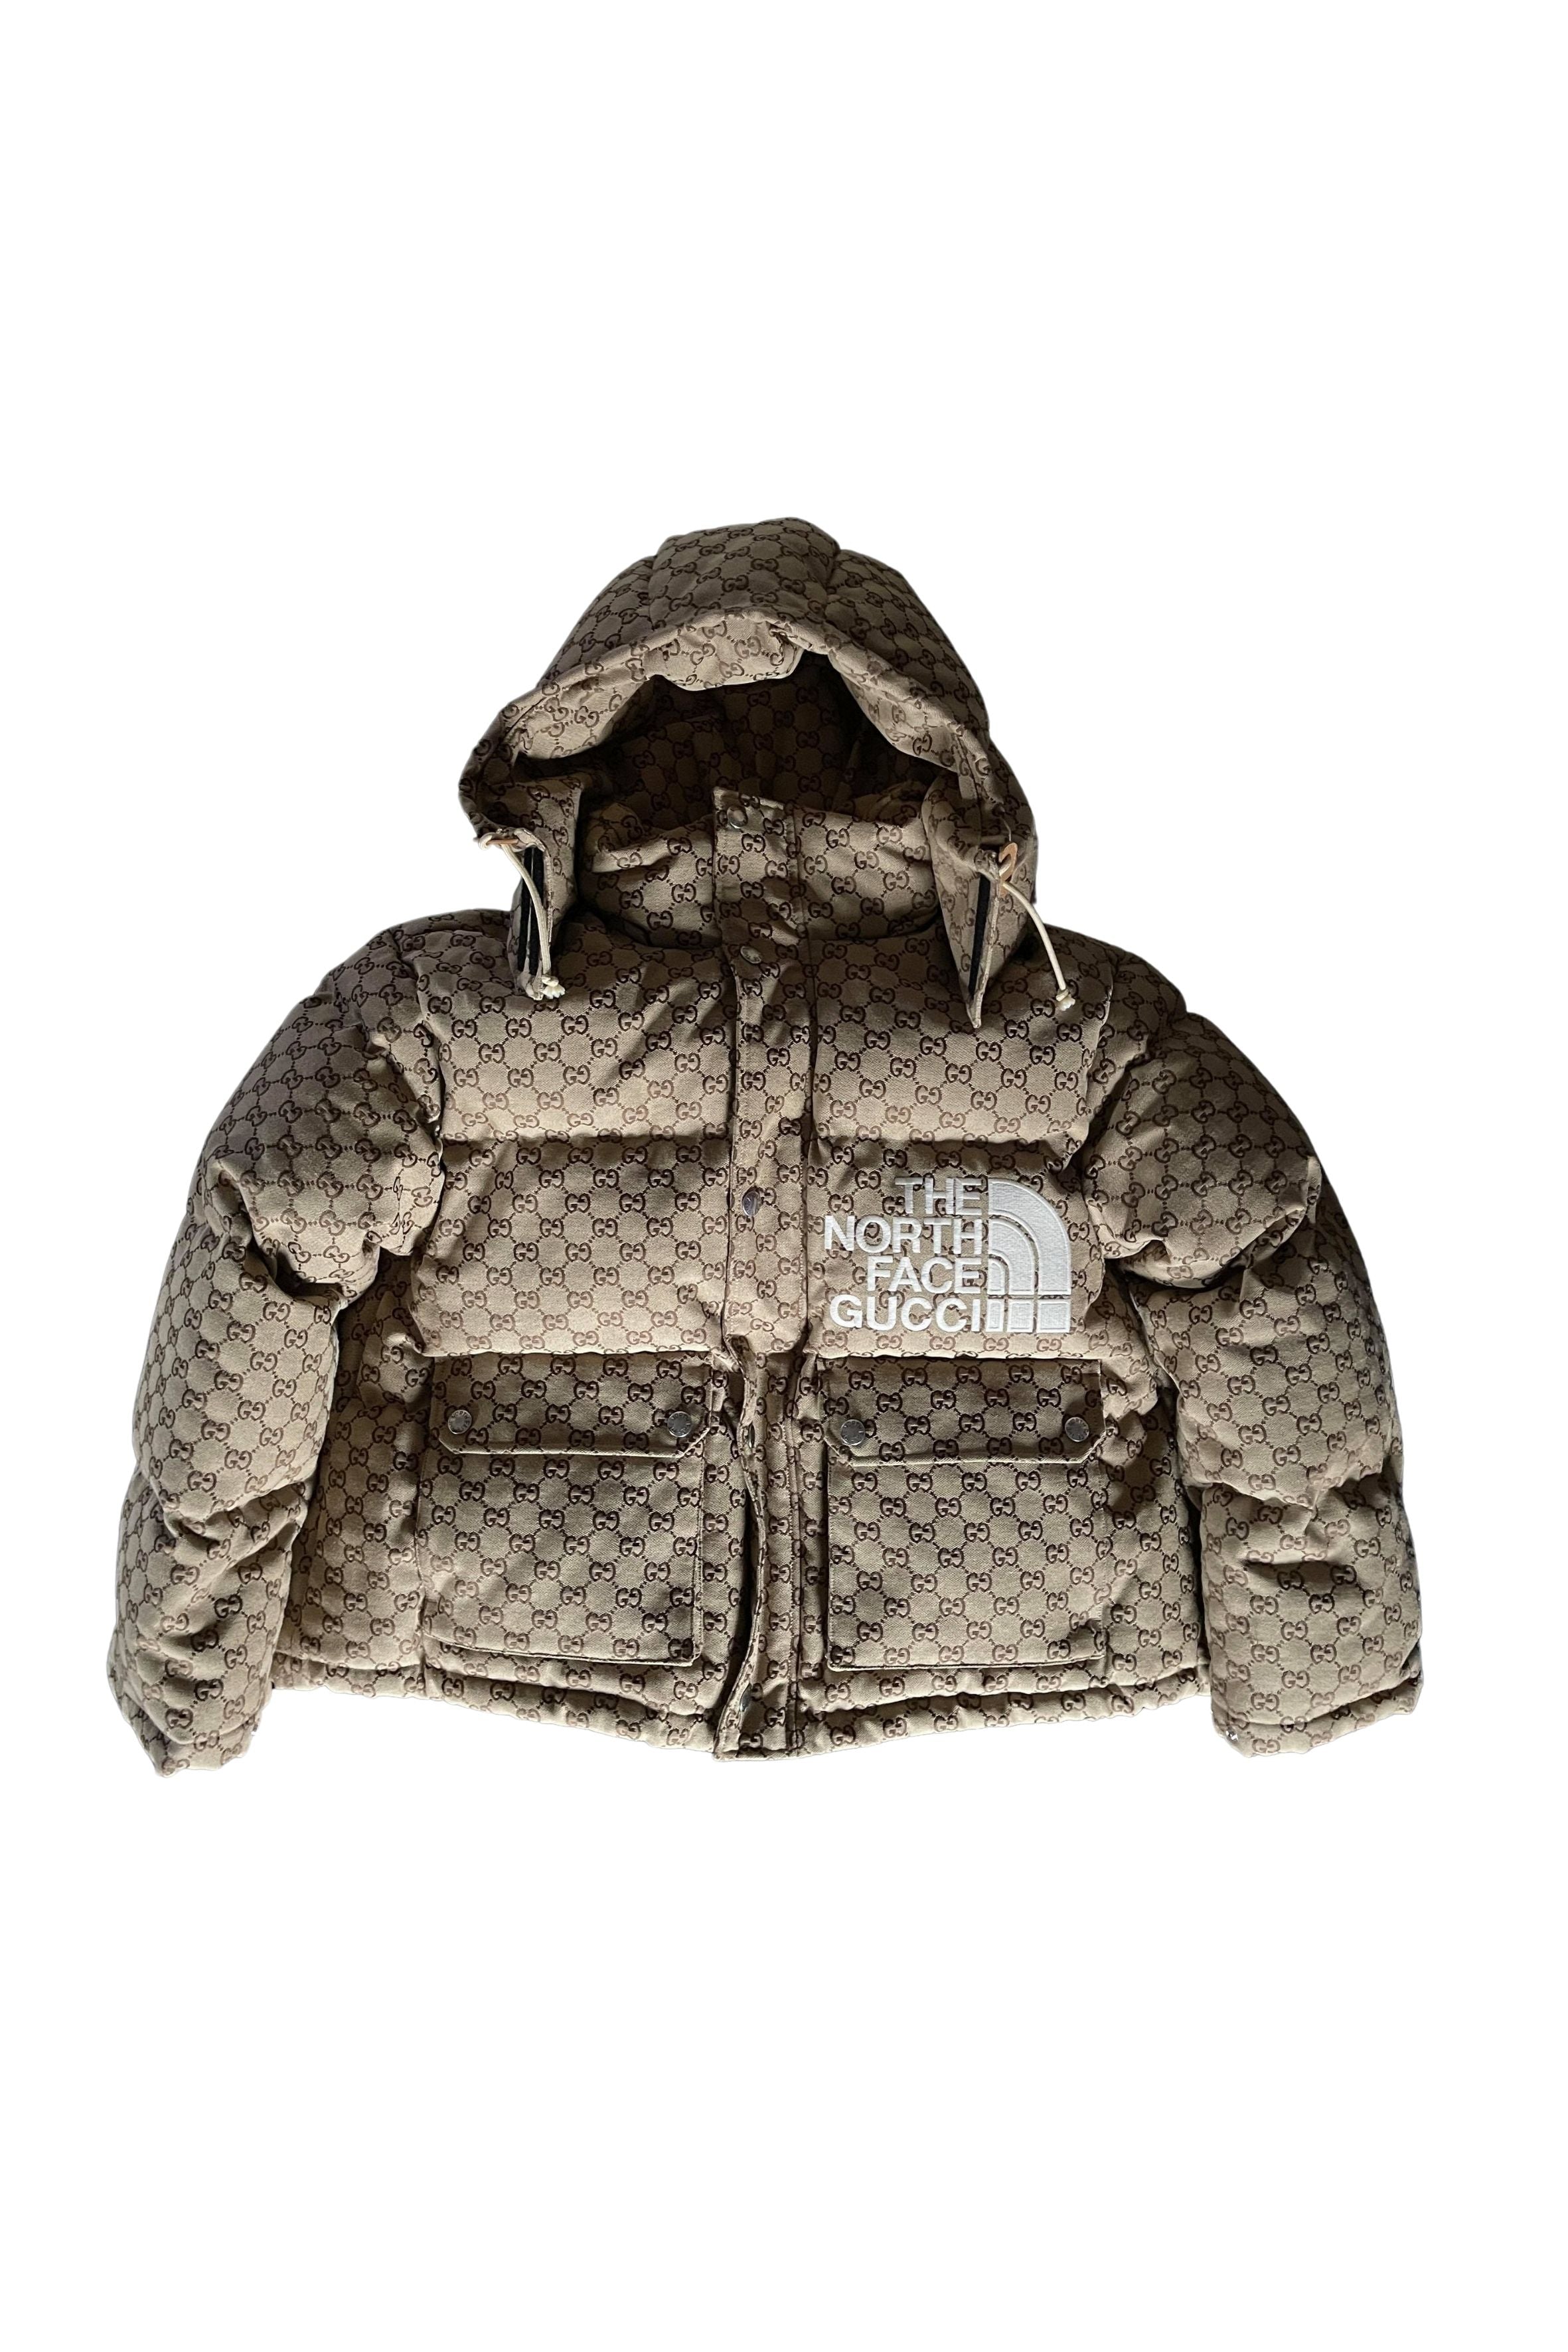 Gucci x The North Face Down Jacket Beige/Ebony